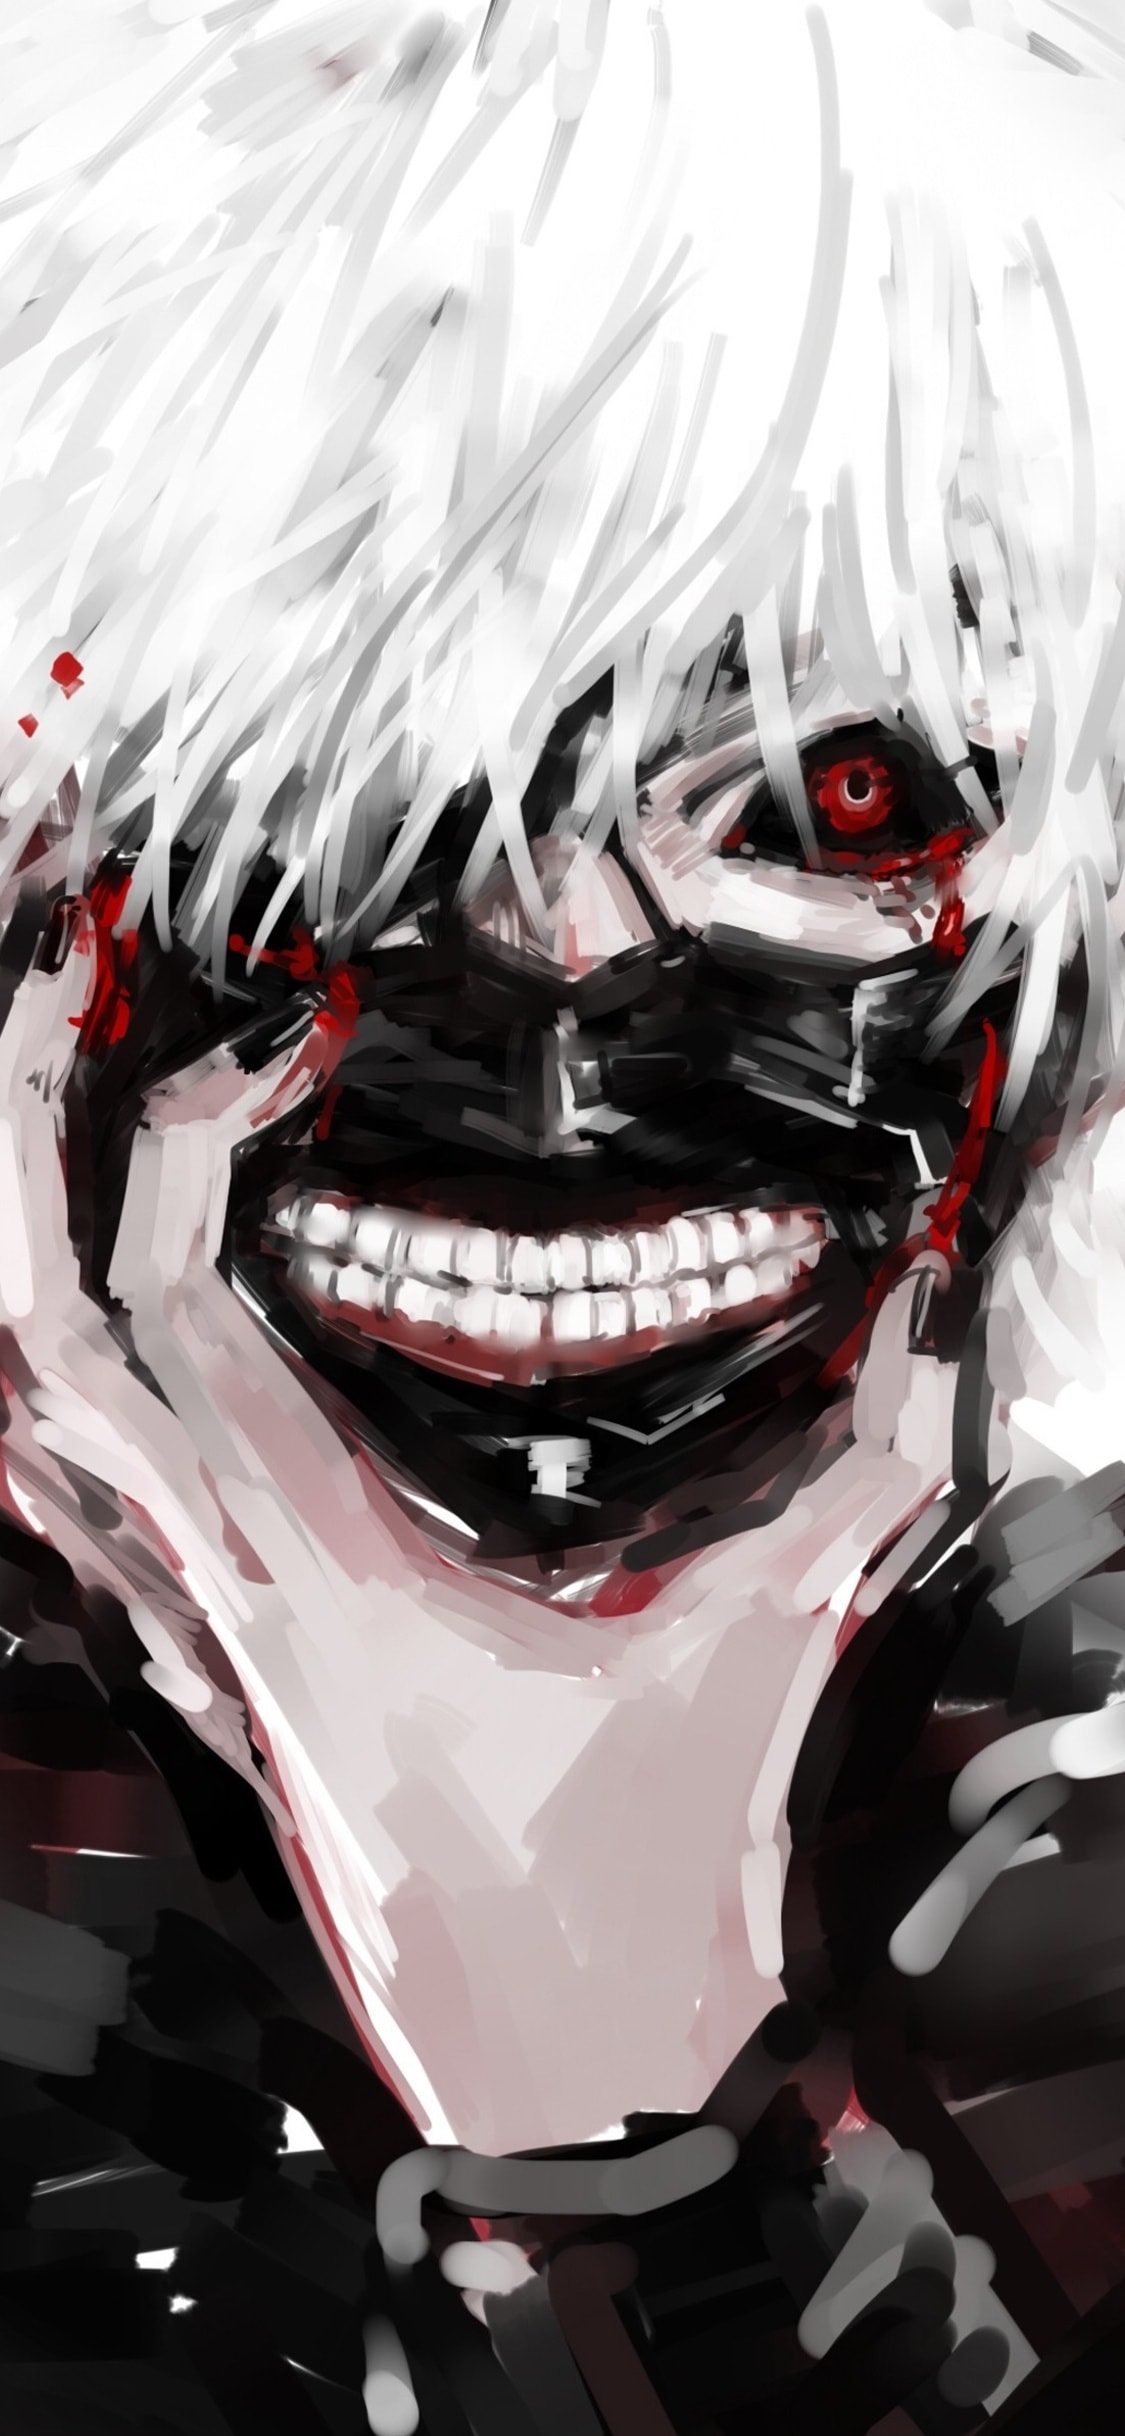 Featured image of post Tokyo Ghoul Wallpaer / Ultra hd 4k tokyo ghoul wallpapers for desktop, pc, laptop, iphone, android phone, smartphone, imac, macbook, tablet, mobile device.